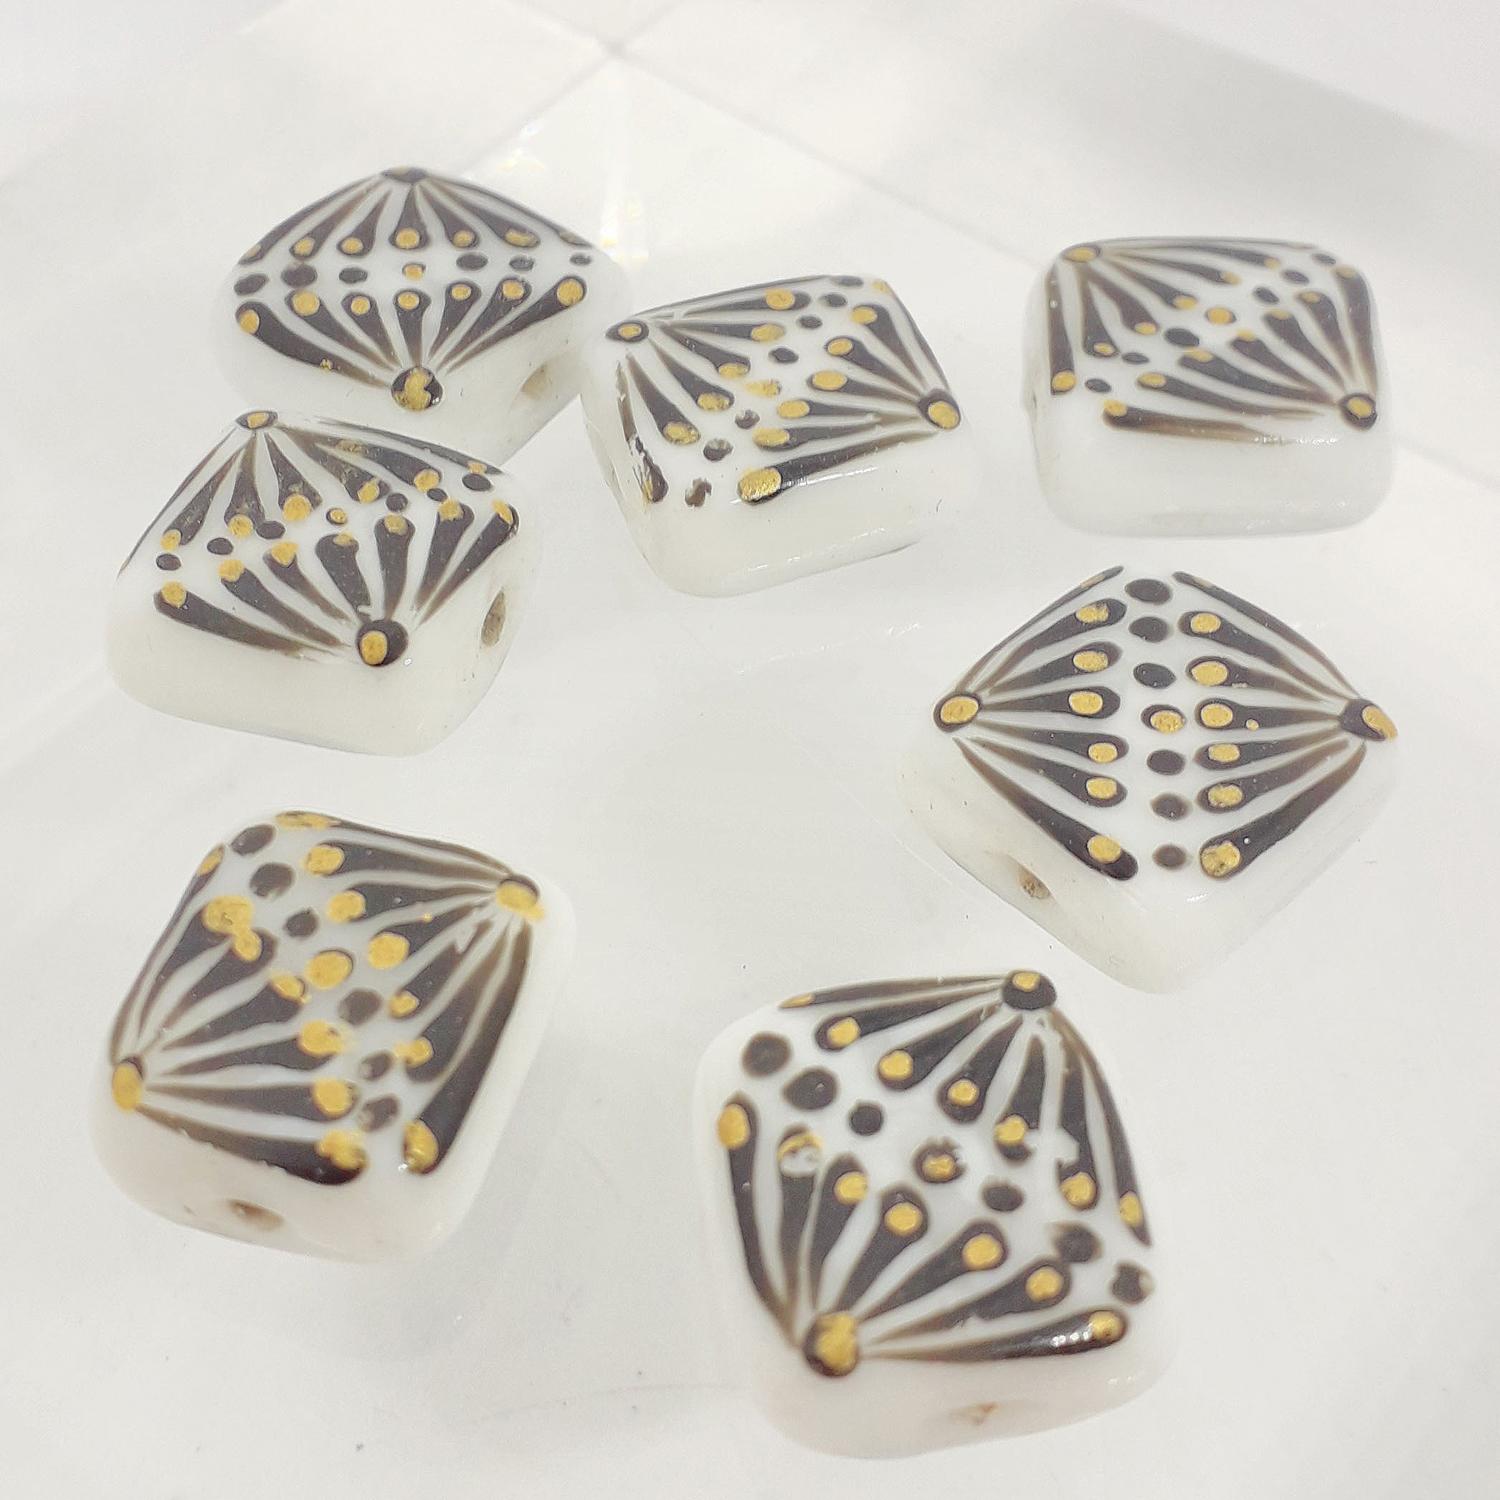 14mm White Glass Square Bead with Hand Painted Black and Gold Fan Design